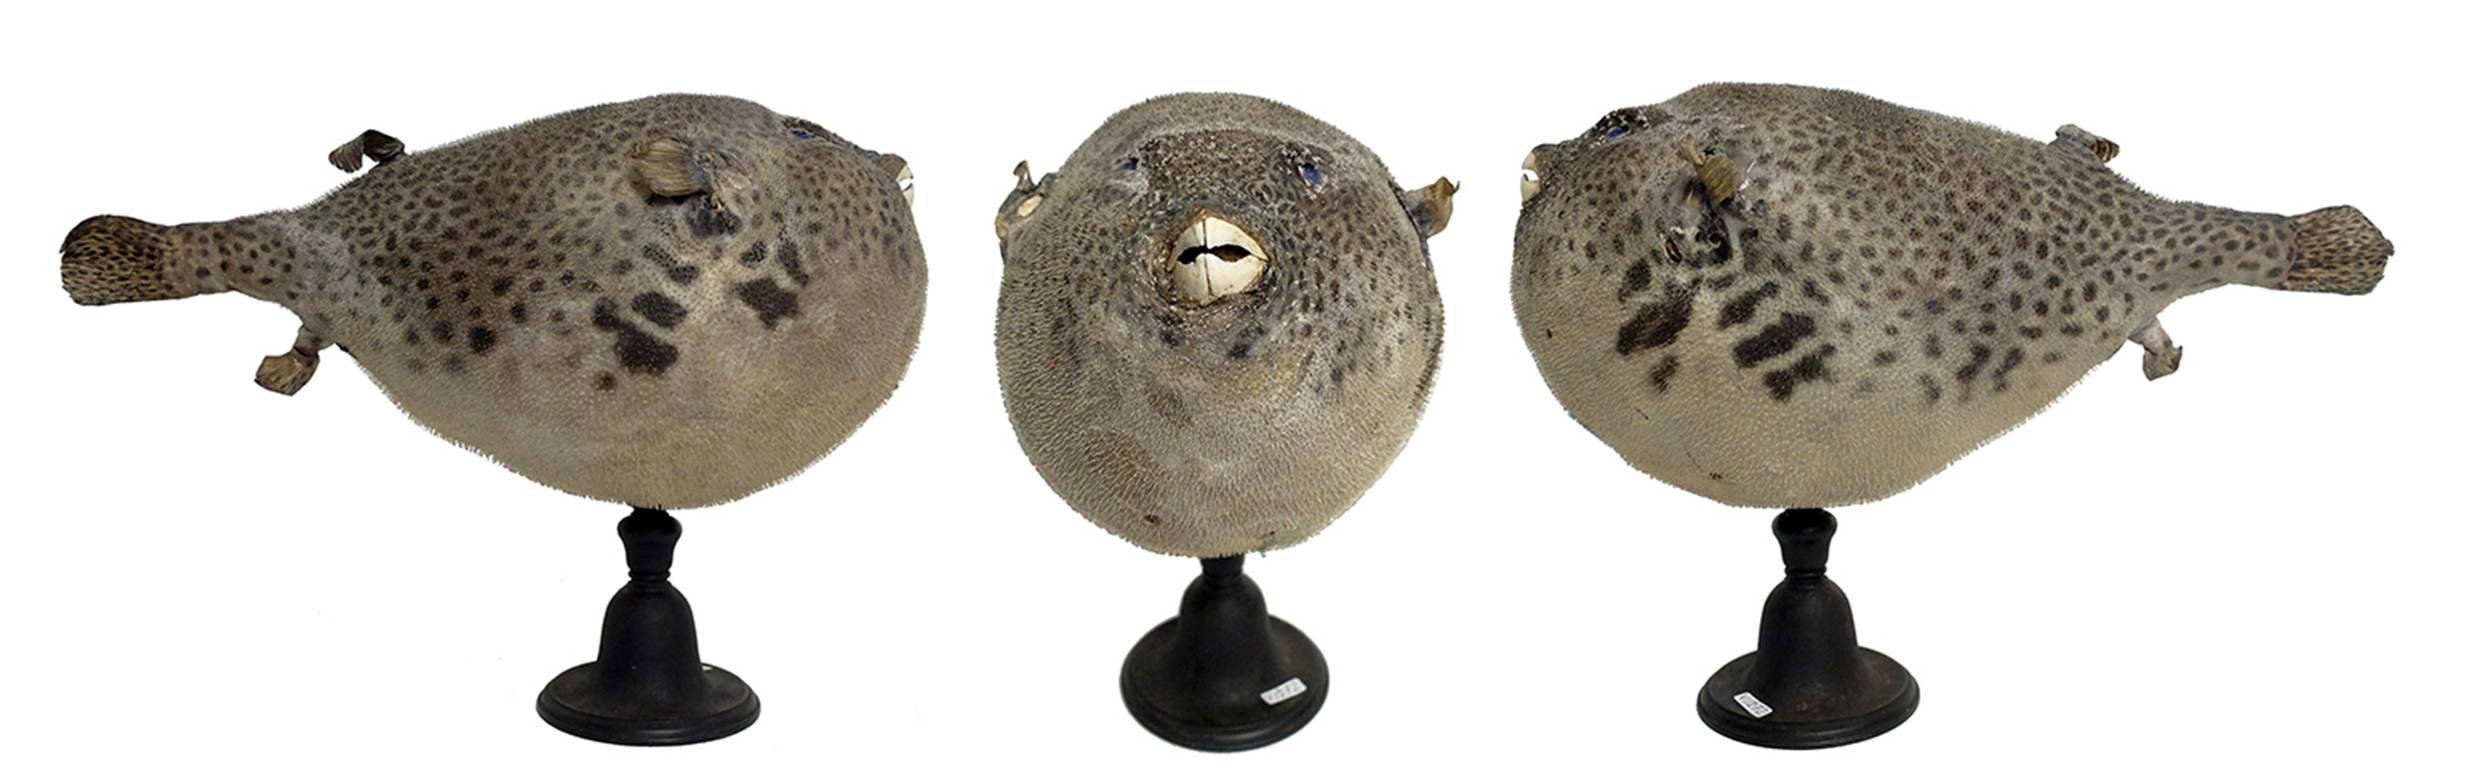 A rare marine natural Wunderkammer specimen, the common puffer fish Tetraodontidae. The Specimen is stuffed and mounted over a dark wooden base. Italy, 1880-1890.